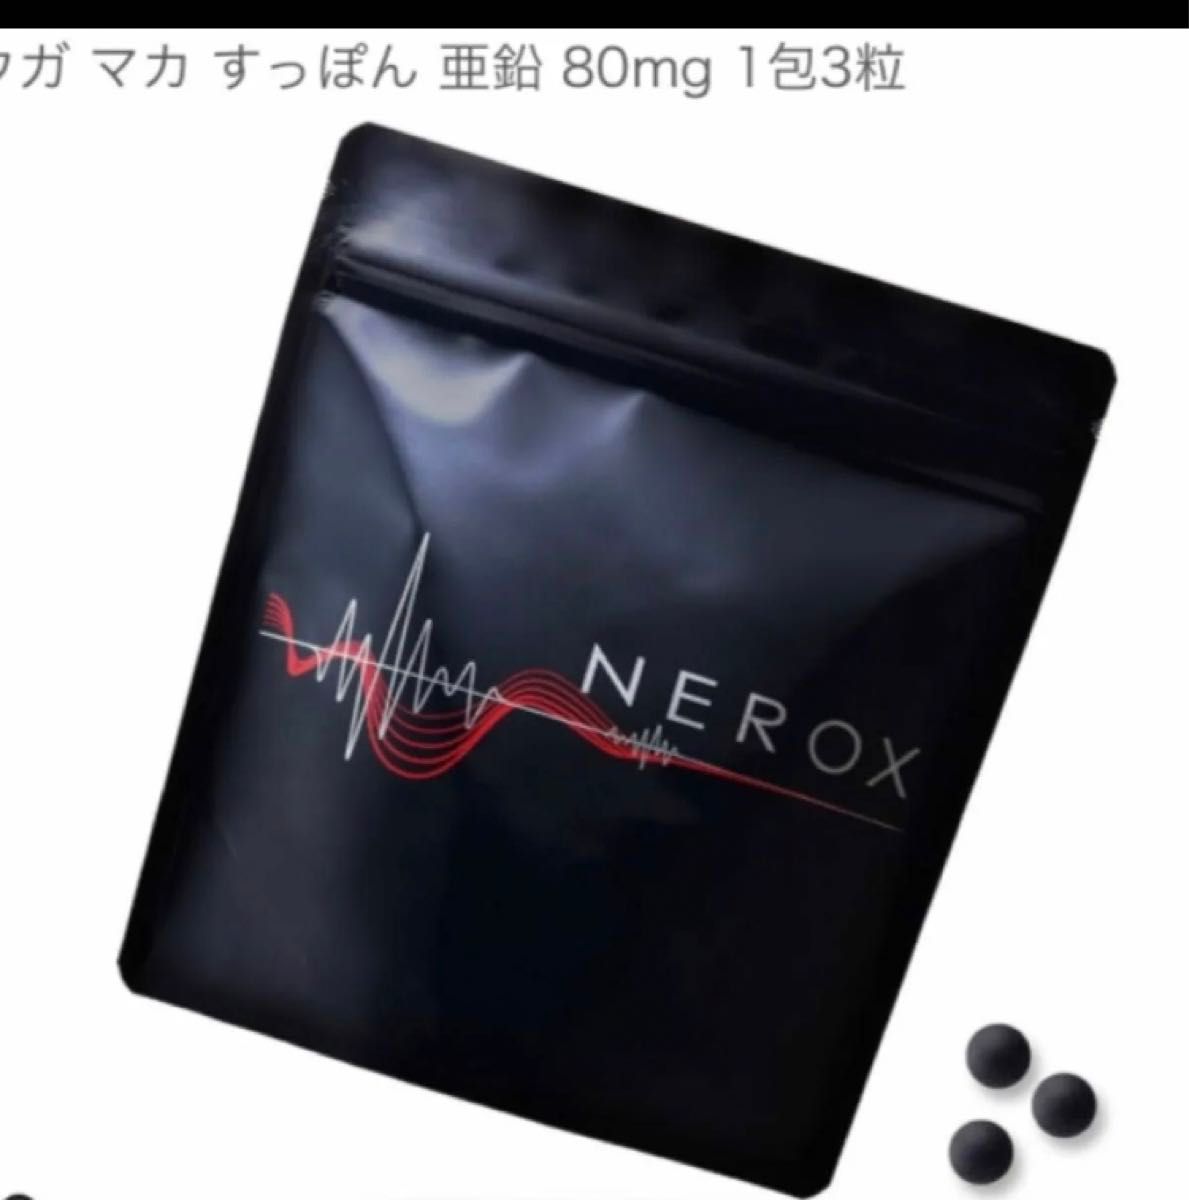 NEROX ネロックス 7日分 3粒×7包